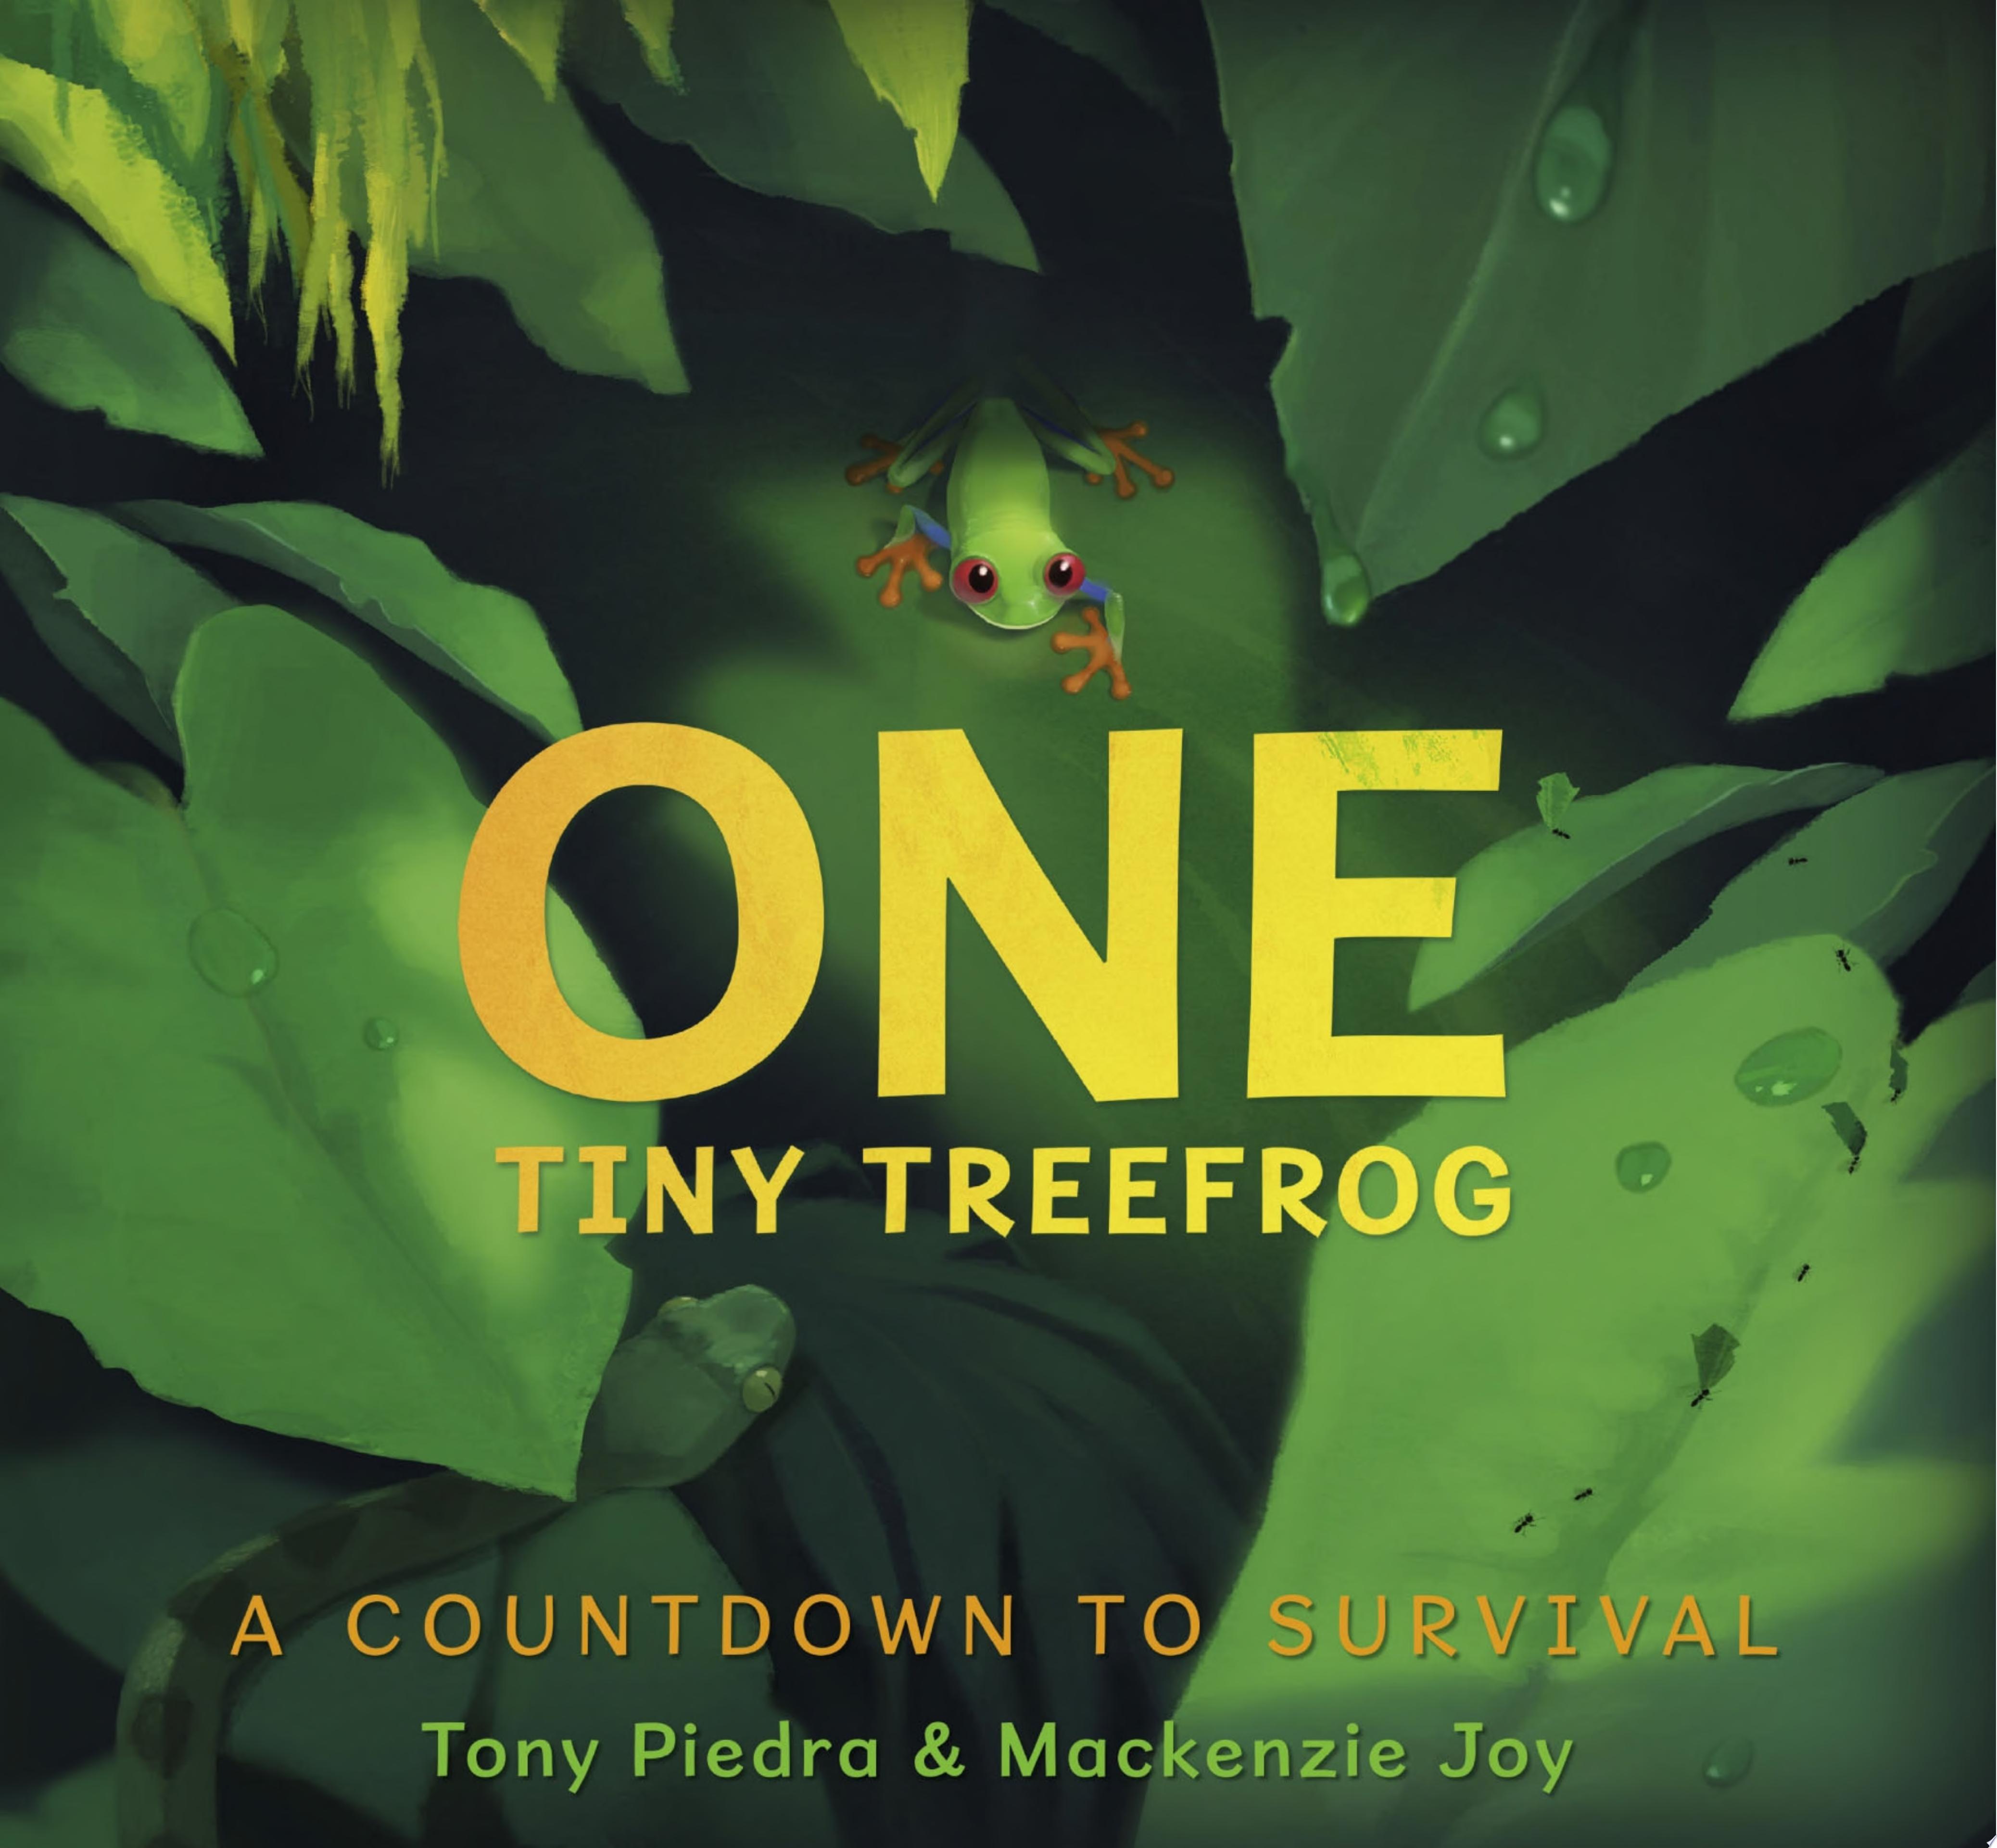 Image for "One Tiny Treefrog: A Countdown to Survival"